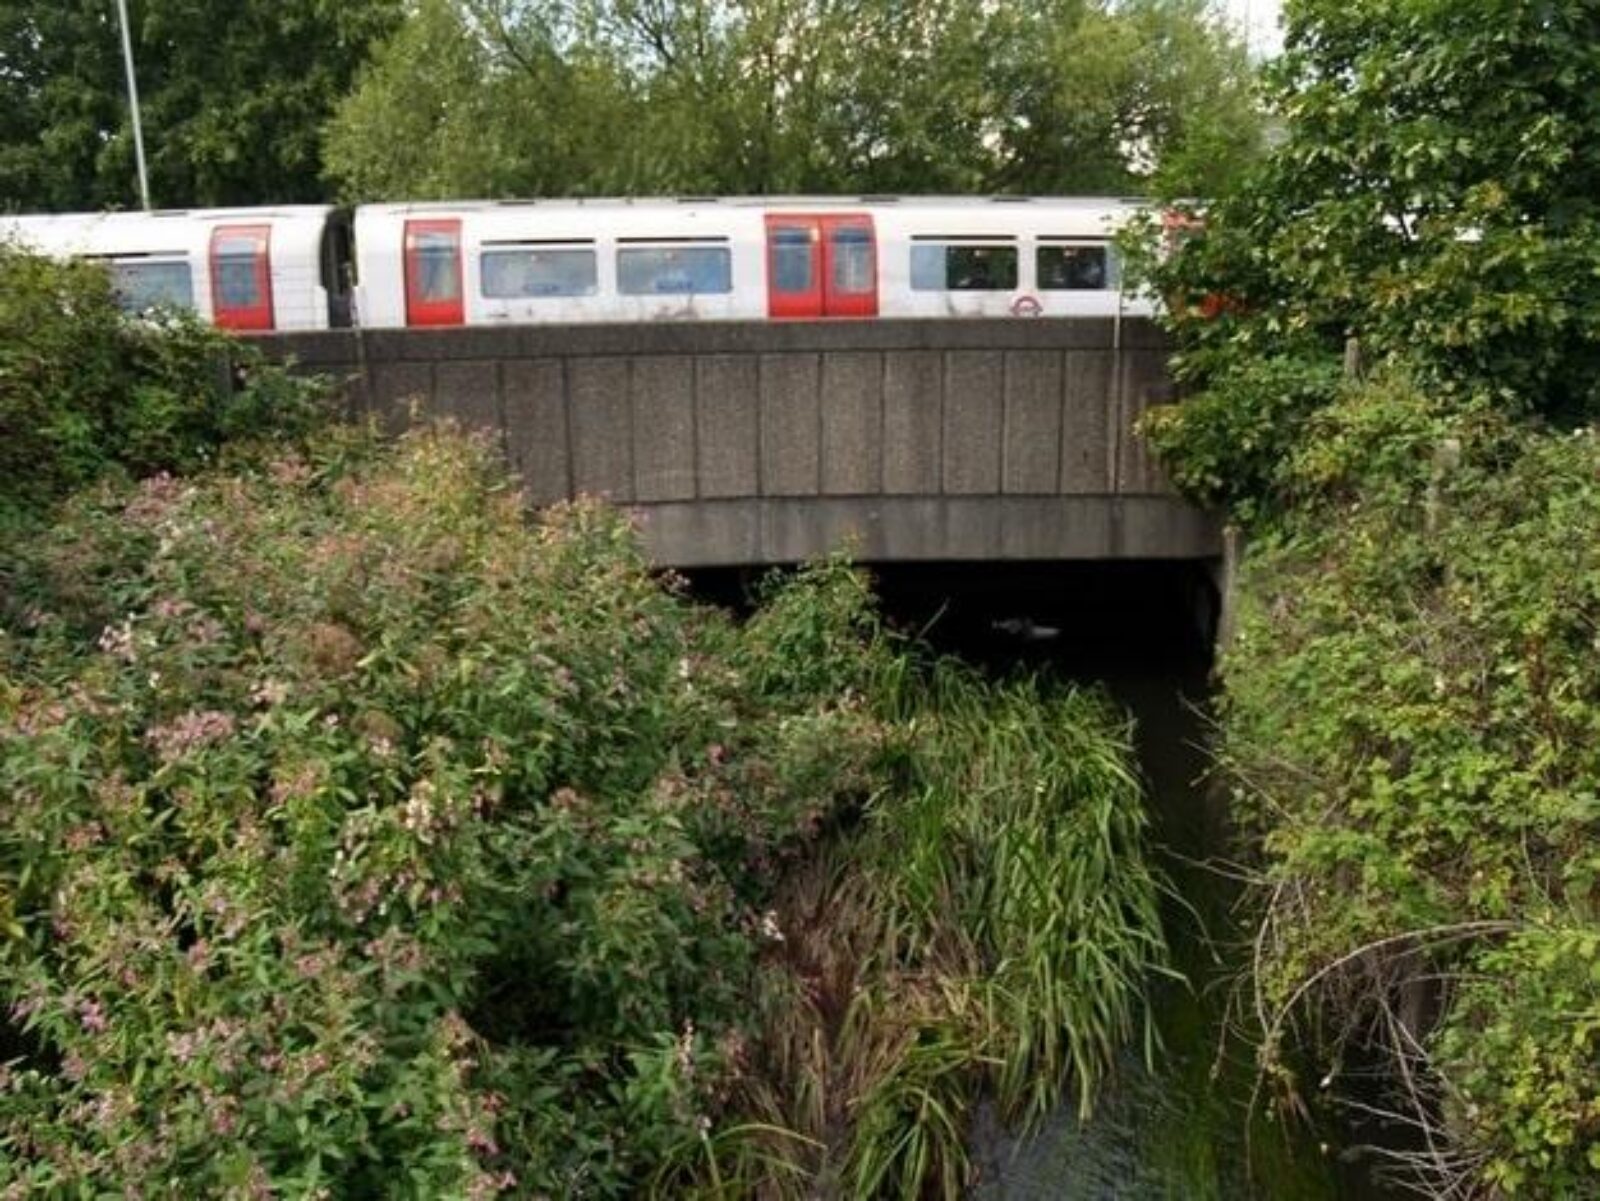 A Piccadilly line train crosses the River Crane at Cranford. Courtesy of londonslostrivers.com